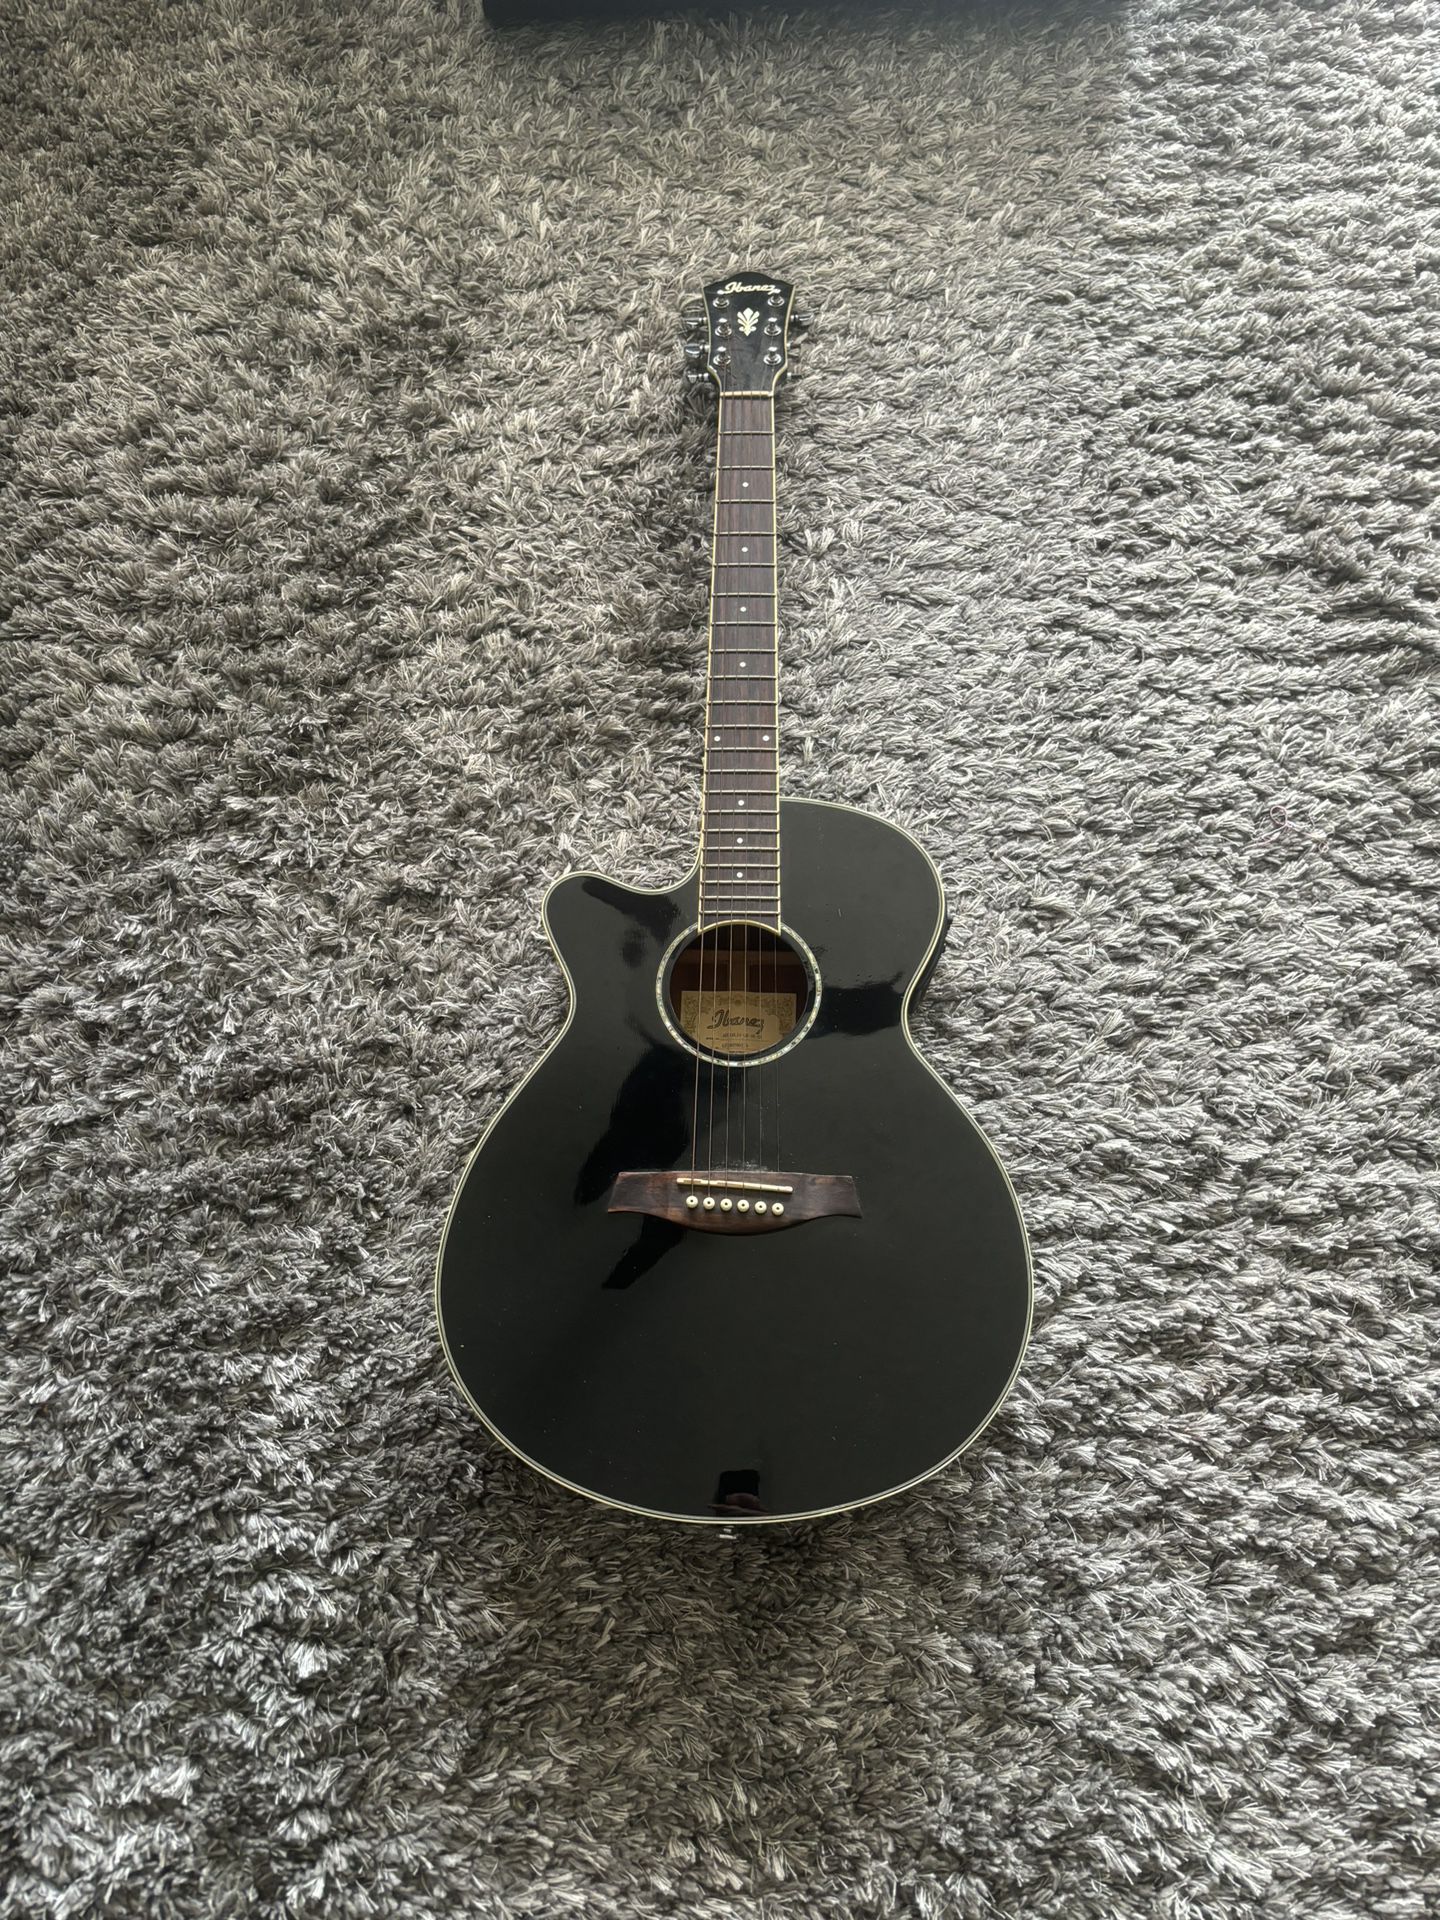 ibanez left handed acoustic electric guitar